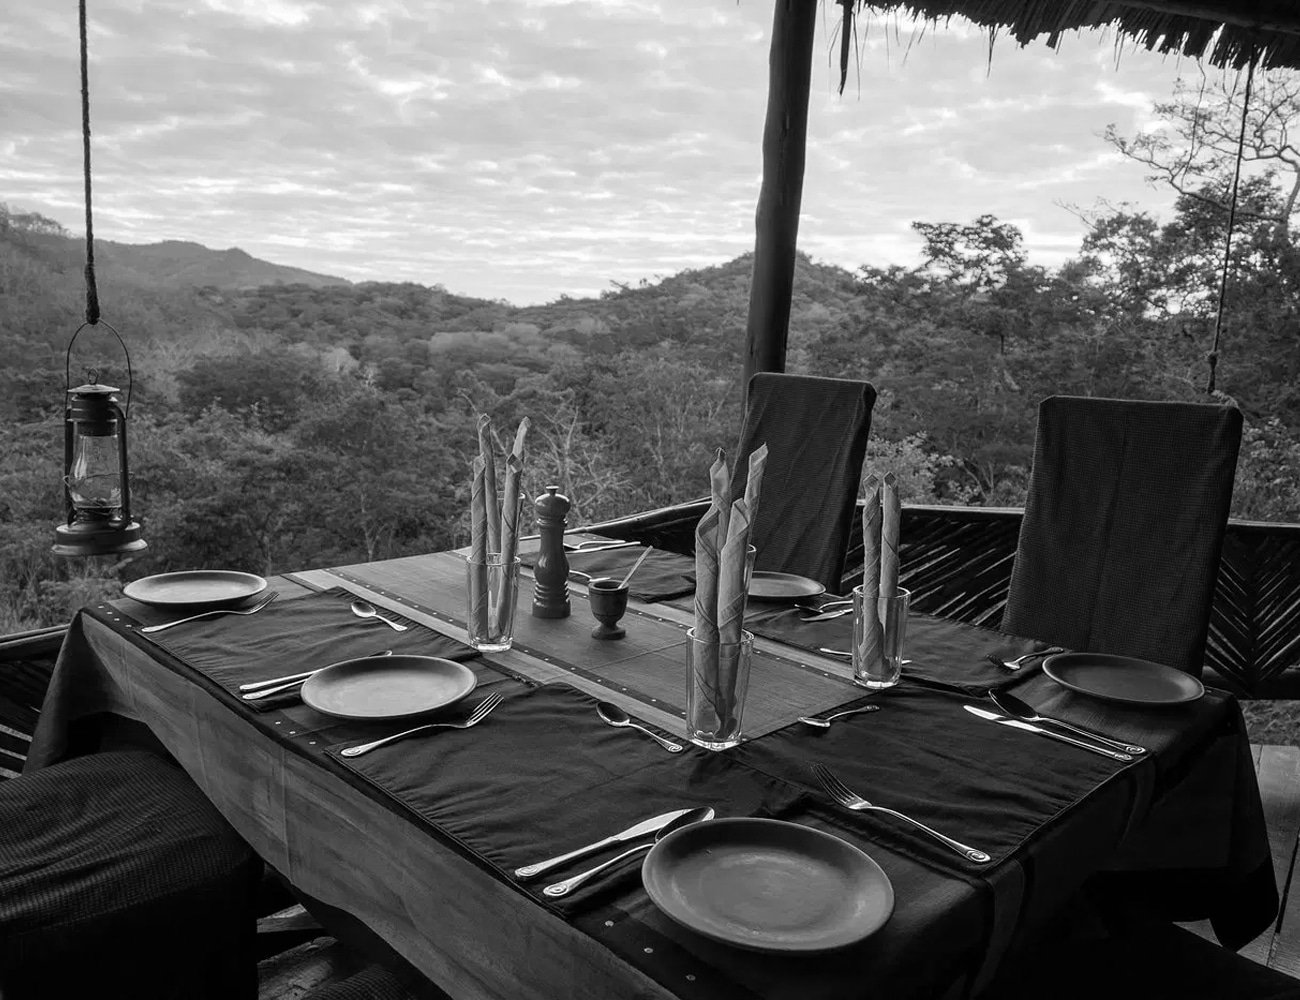 Dining Setup at Sable Moutain Lodge